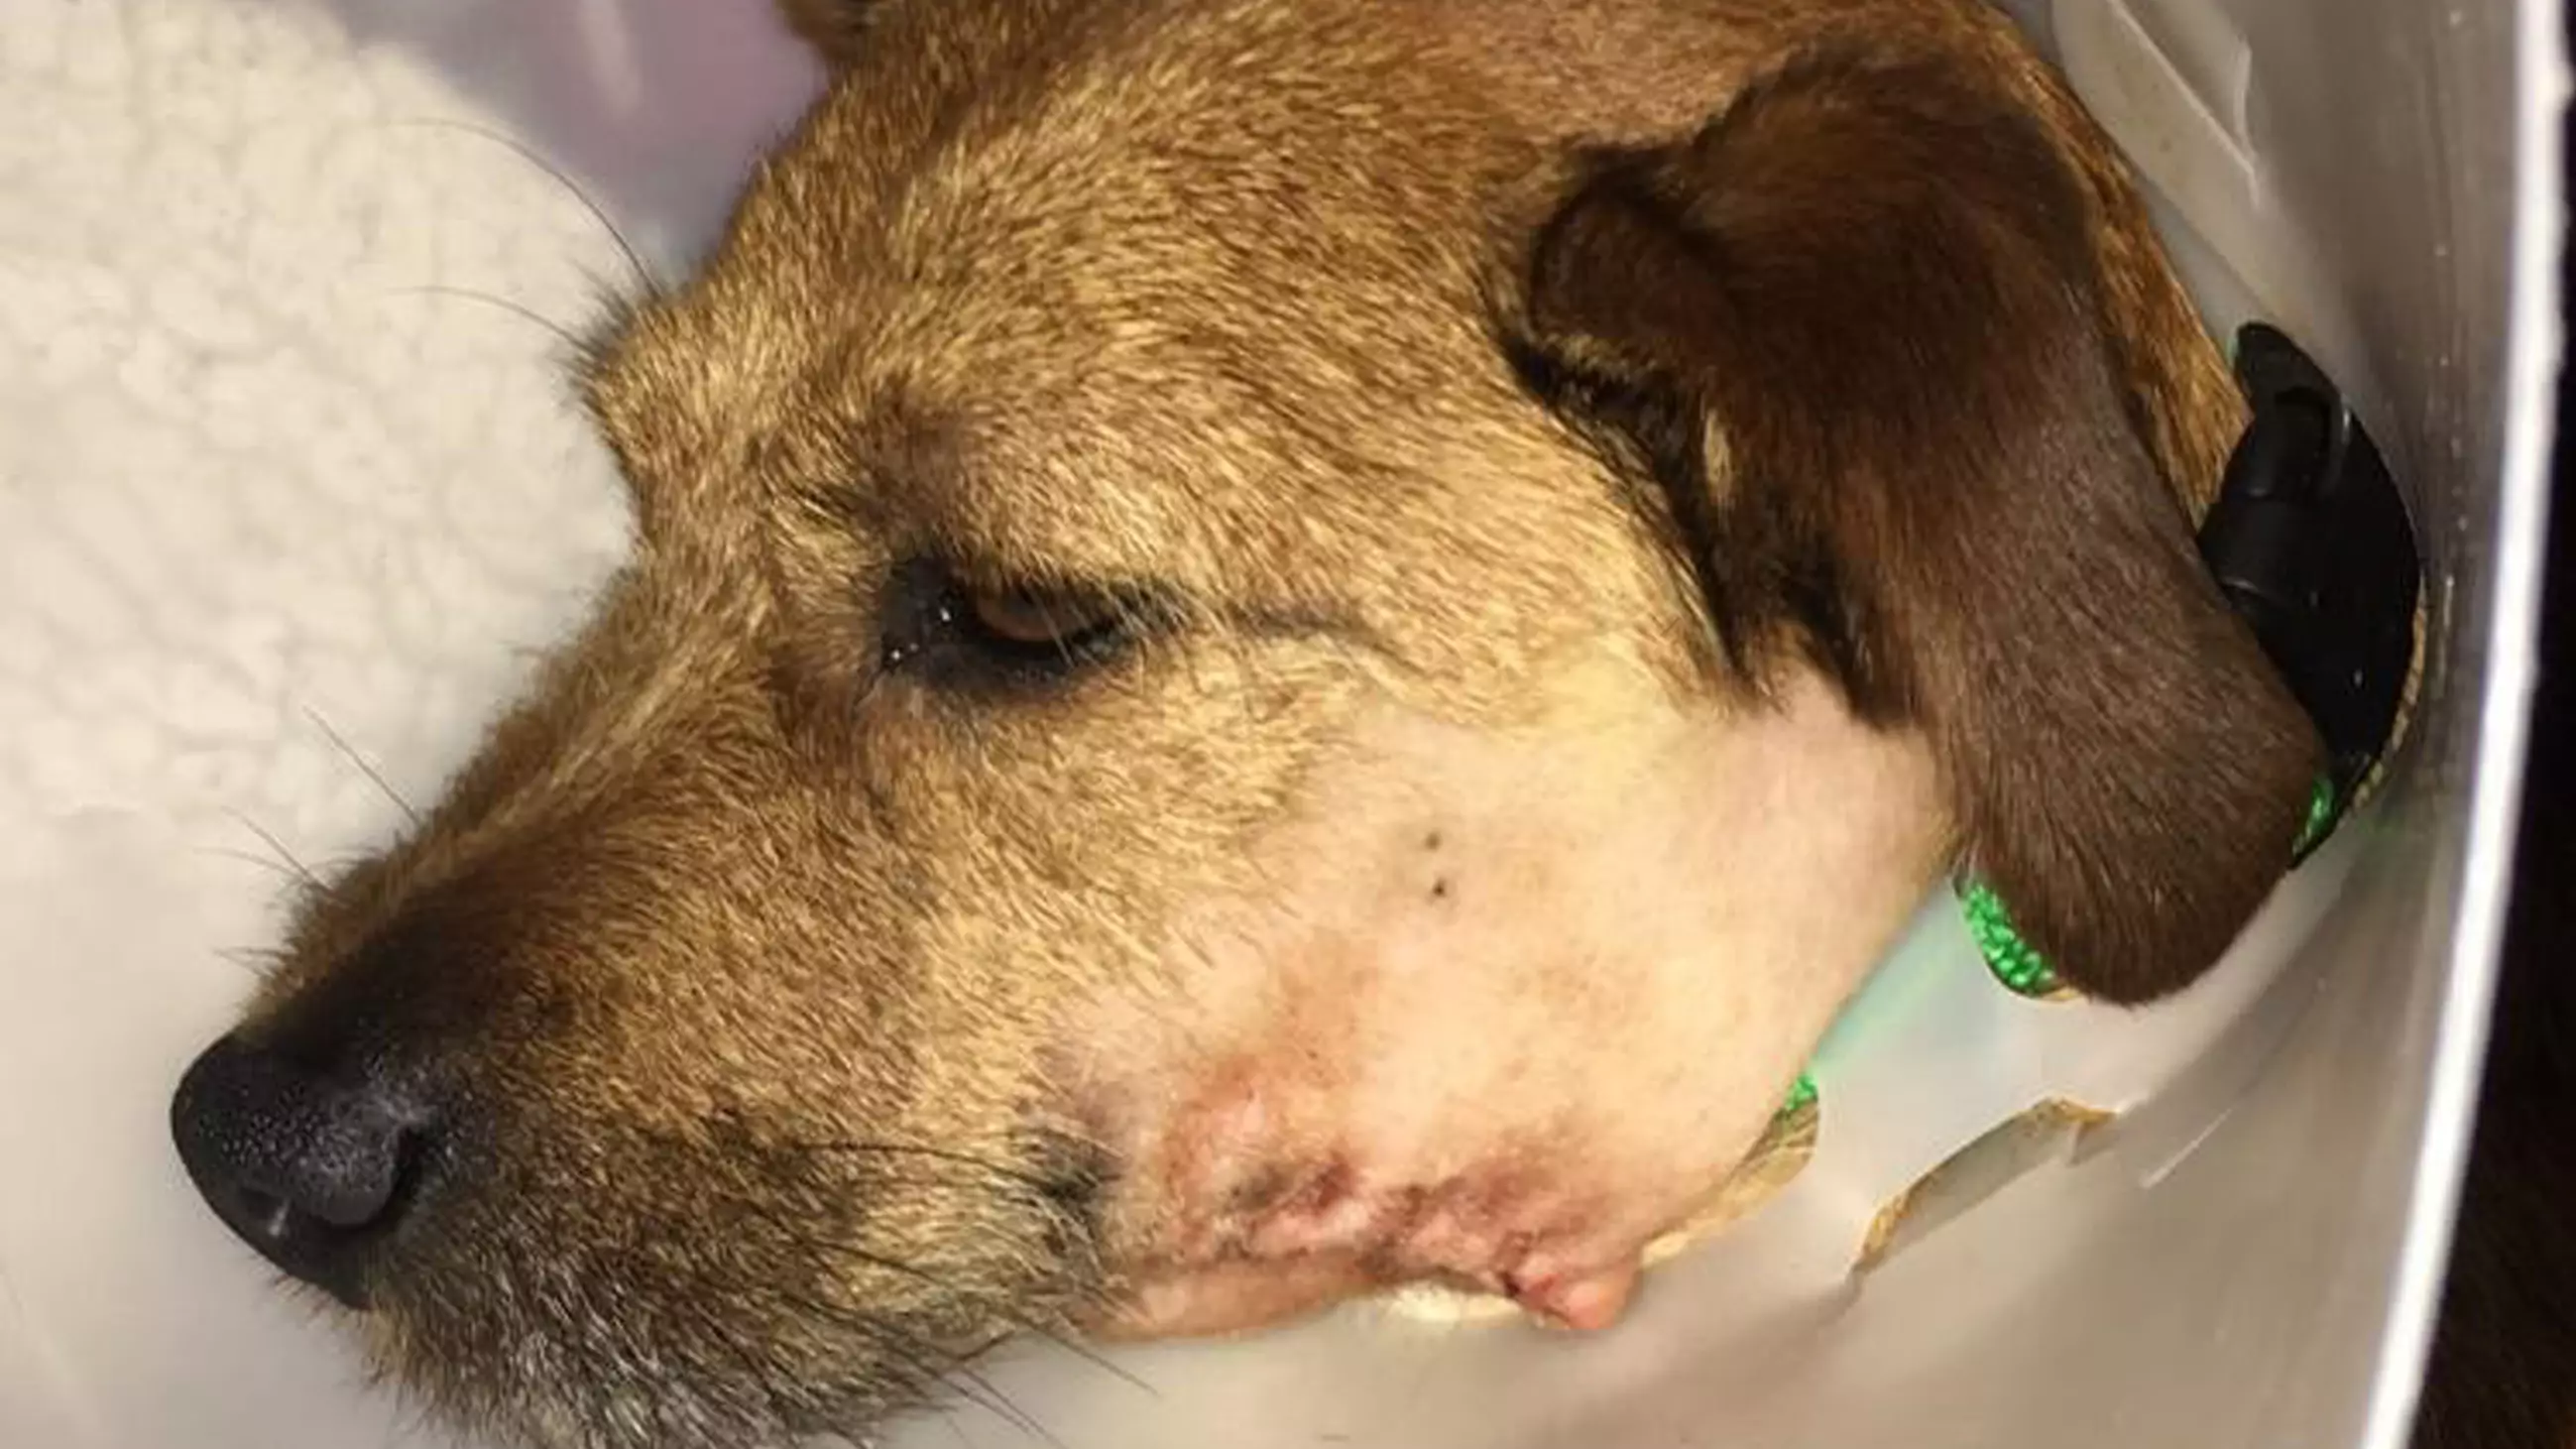 Dog Owner Issues Urgent Warning After Her Pet Was Nearly Killed By Stick